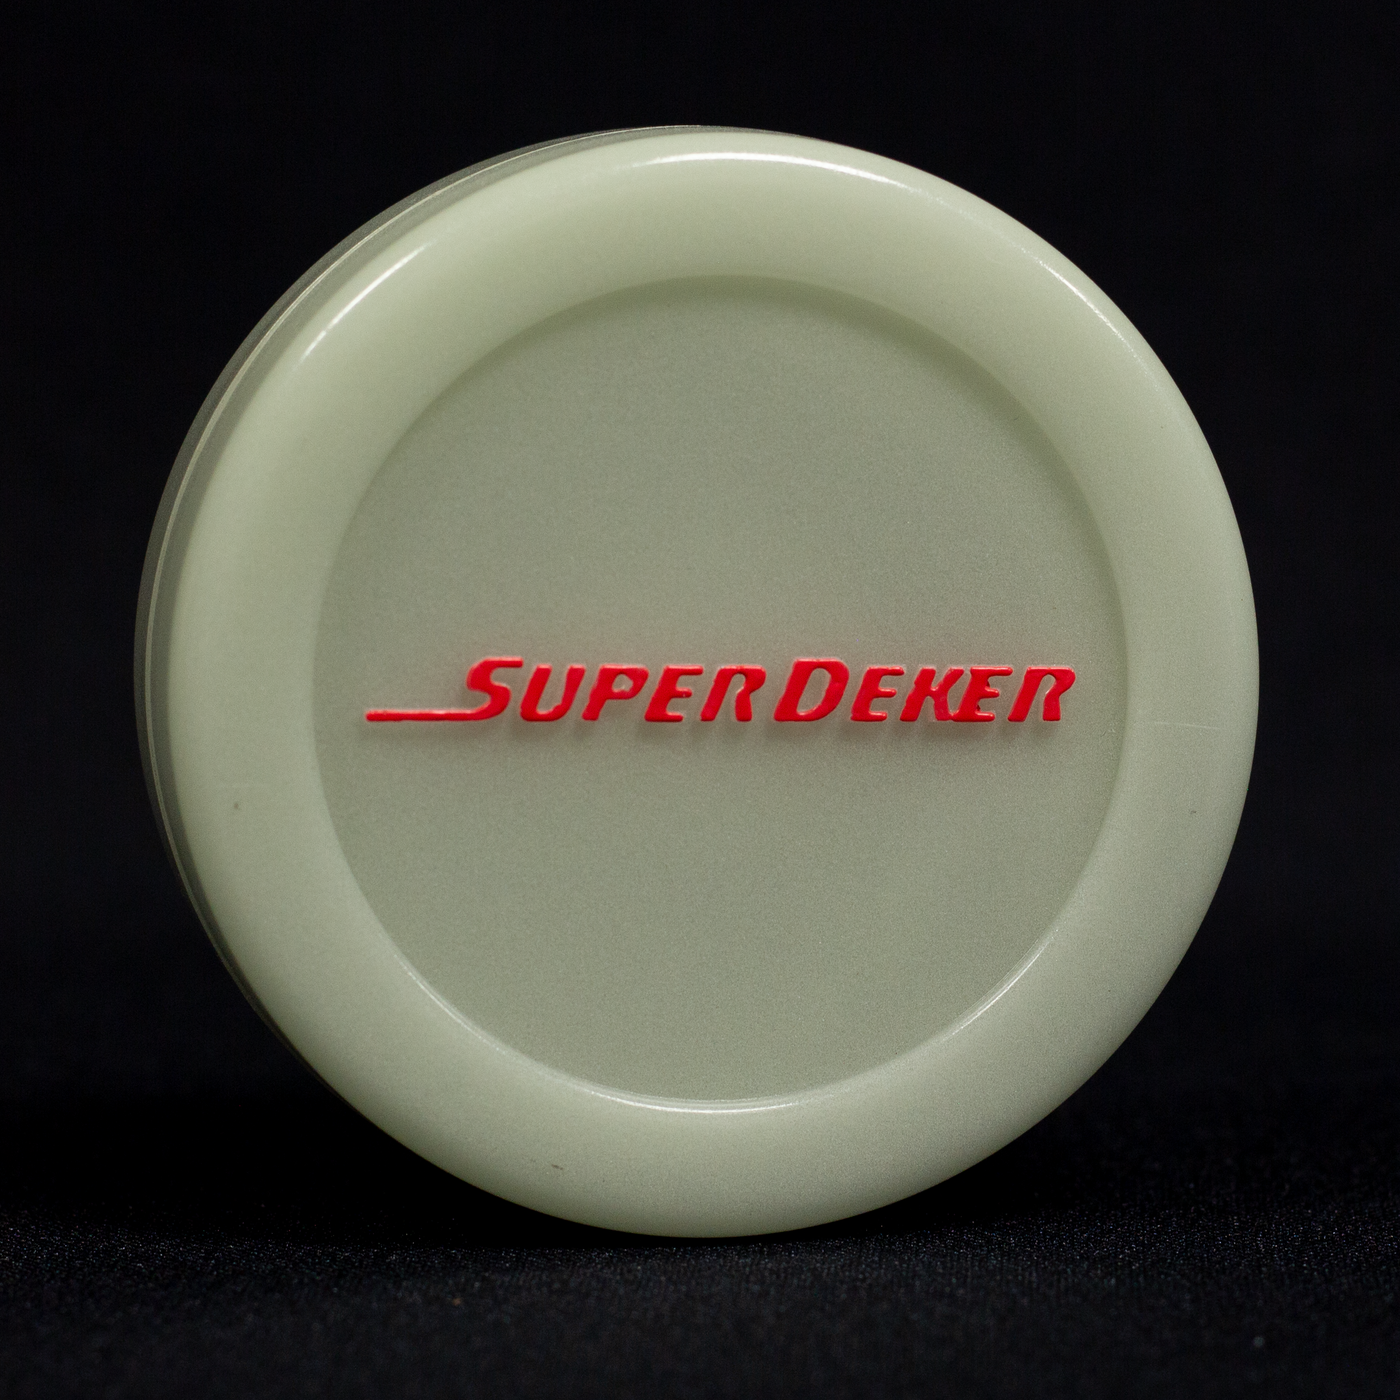 SuperDeker Glow Hockey Pucks for Off Ice Stickhandling Drills is the same weight of a regulation puck, making them the perfect stickhandling accessories for fun fast-hands training. 